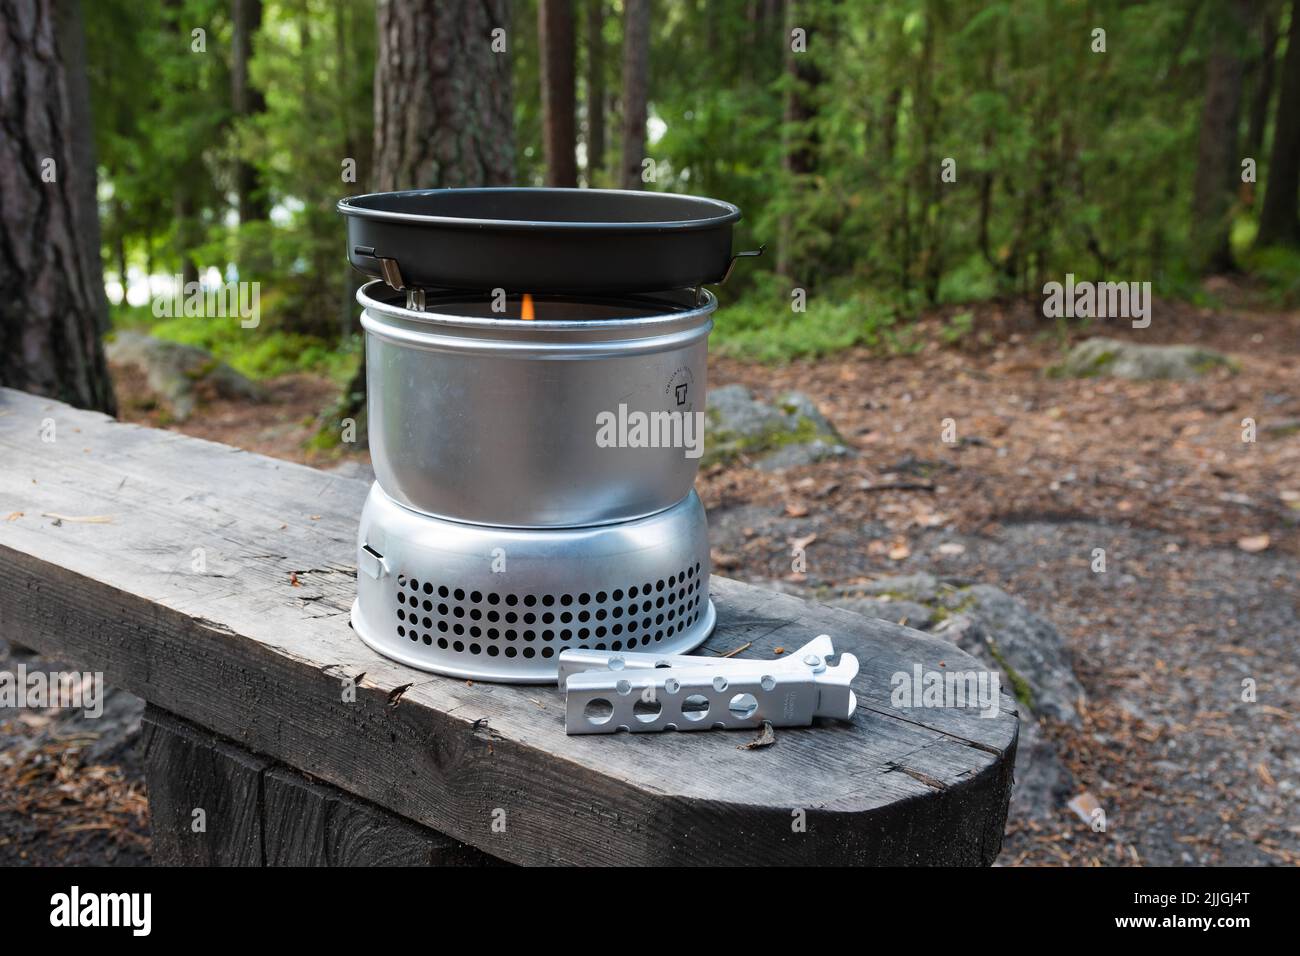 Hameenlinna, Finland. July 10, 2022. Trangia, the portable camping stove on a bench in a forest Stock Photo